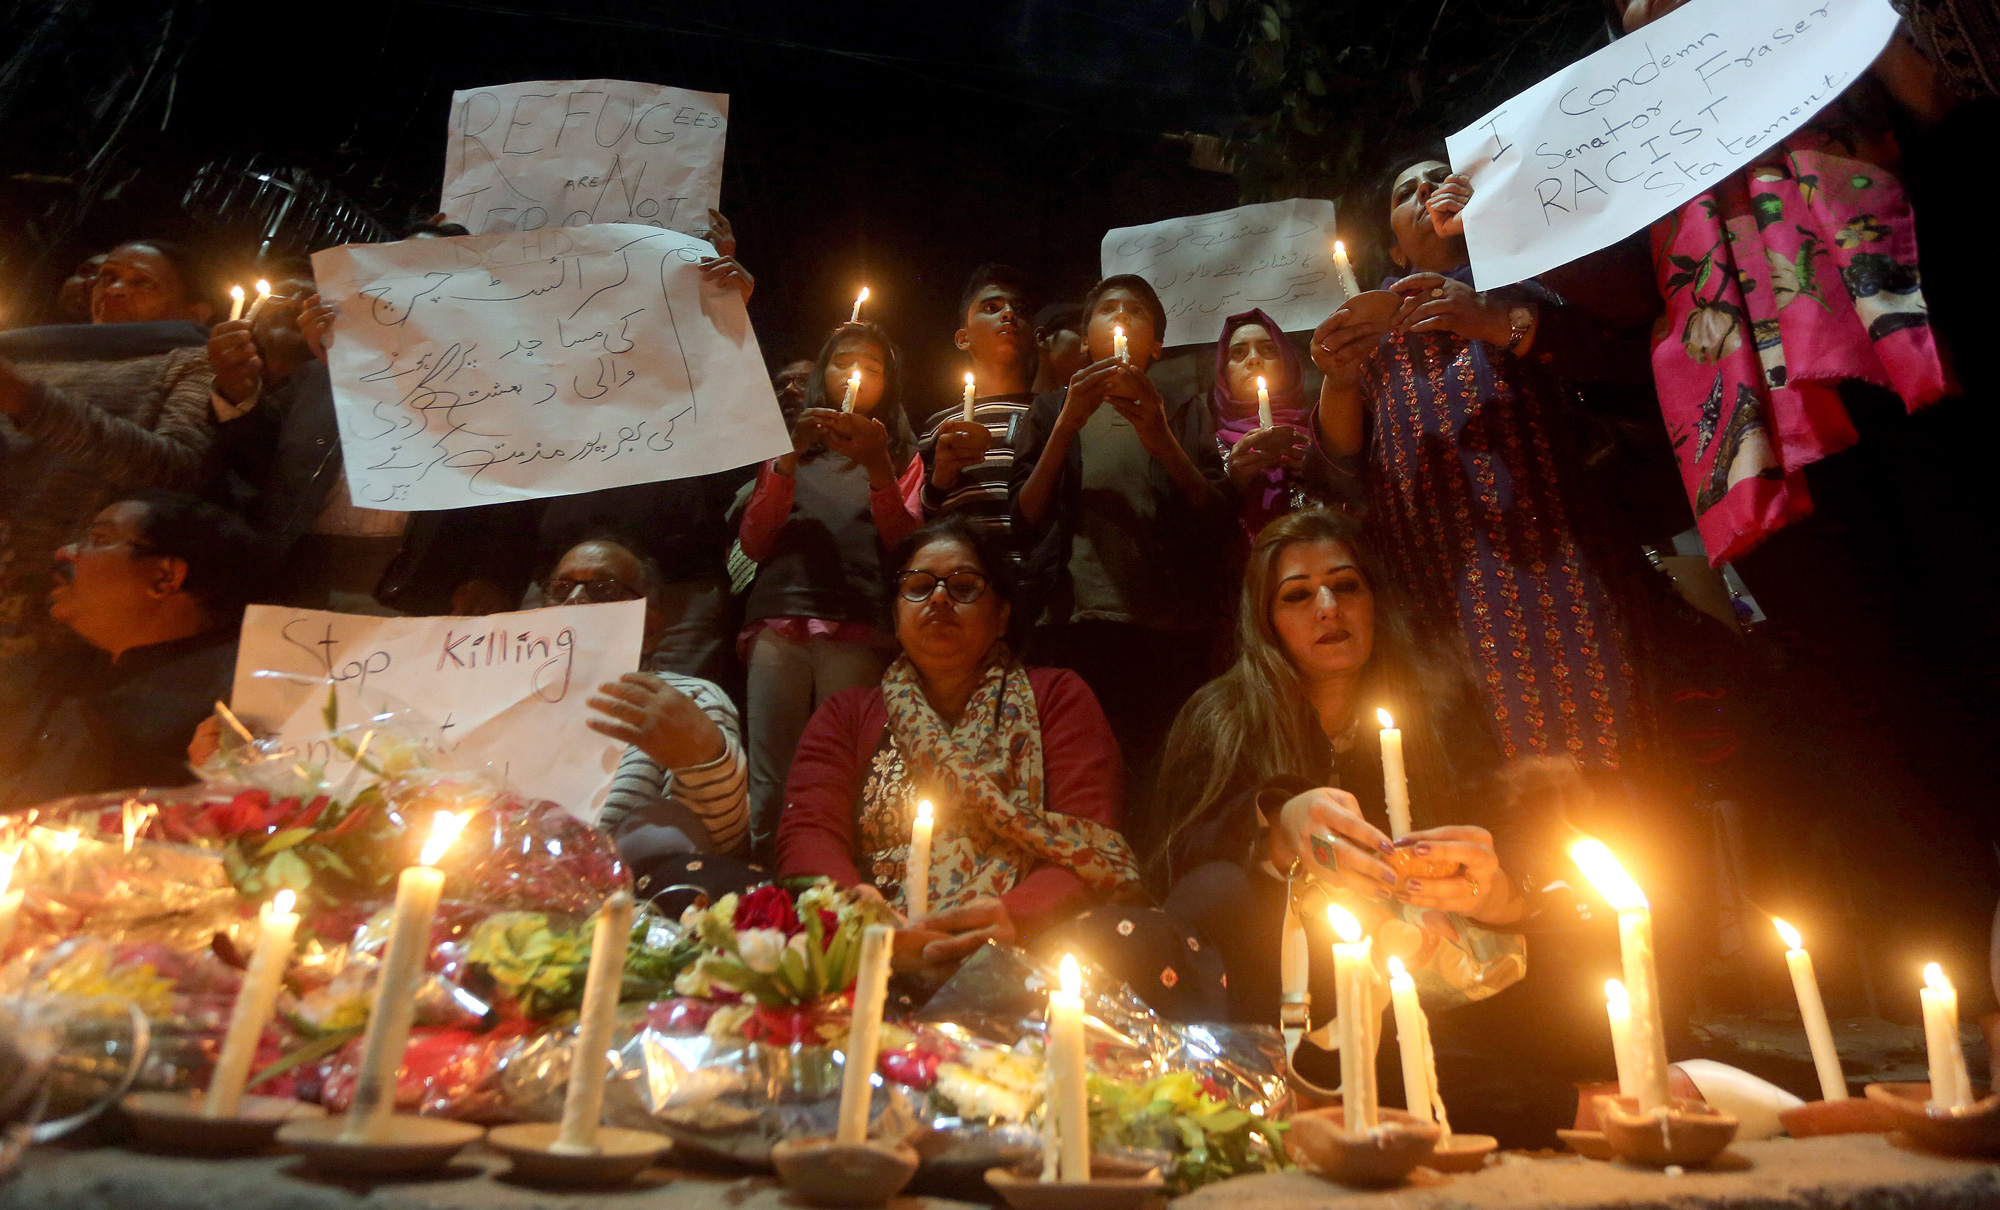 Members of civil society group 'Joint Action Committee for People Rights' hold a candle light vigil for the victims of Christchurch mosque shooting, in Lahore, Pakistan on Saturday, March 16, 2019. 